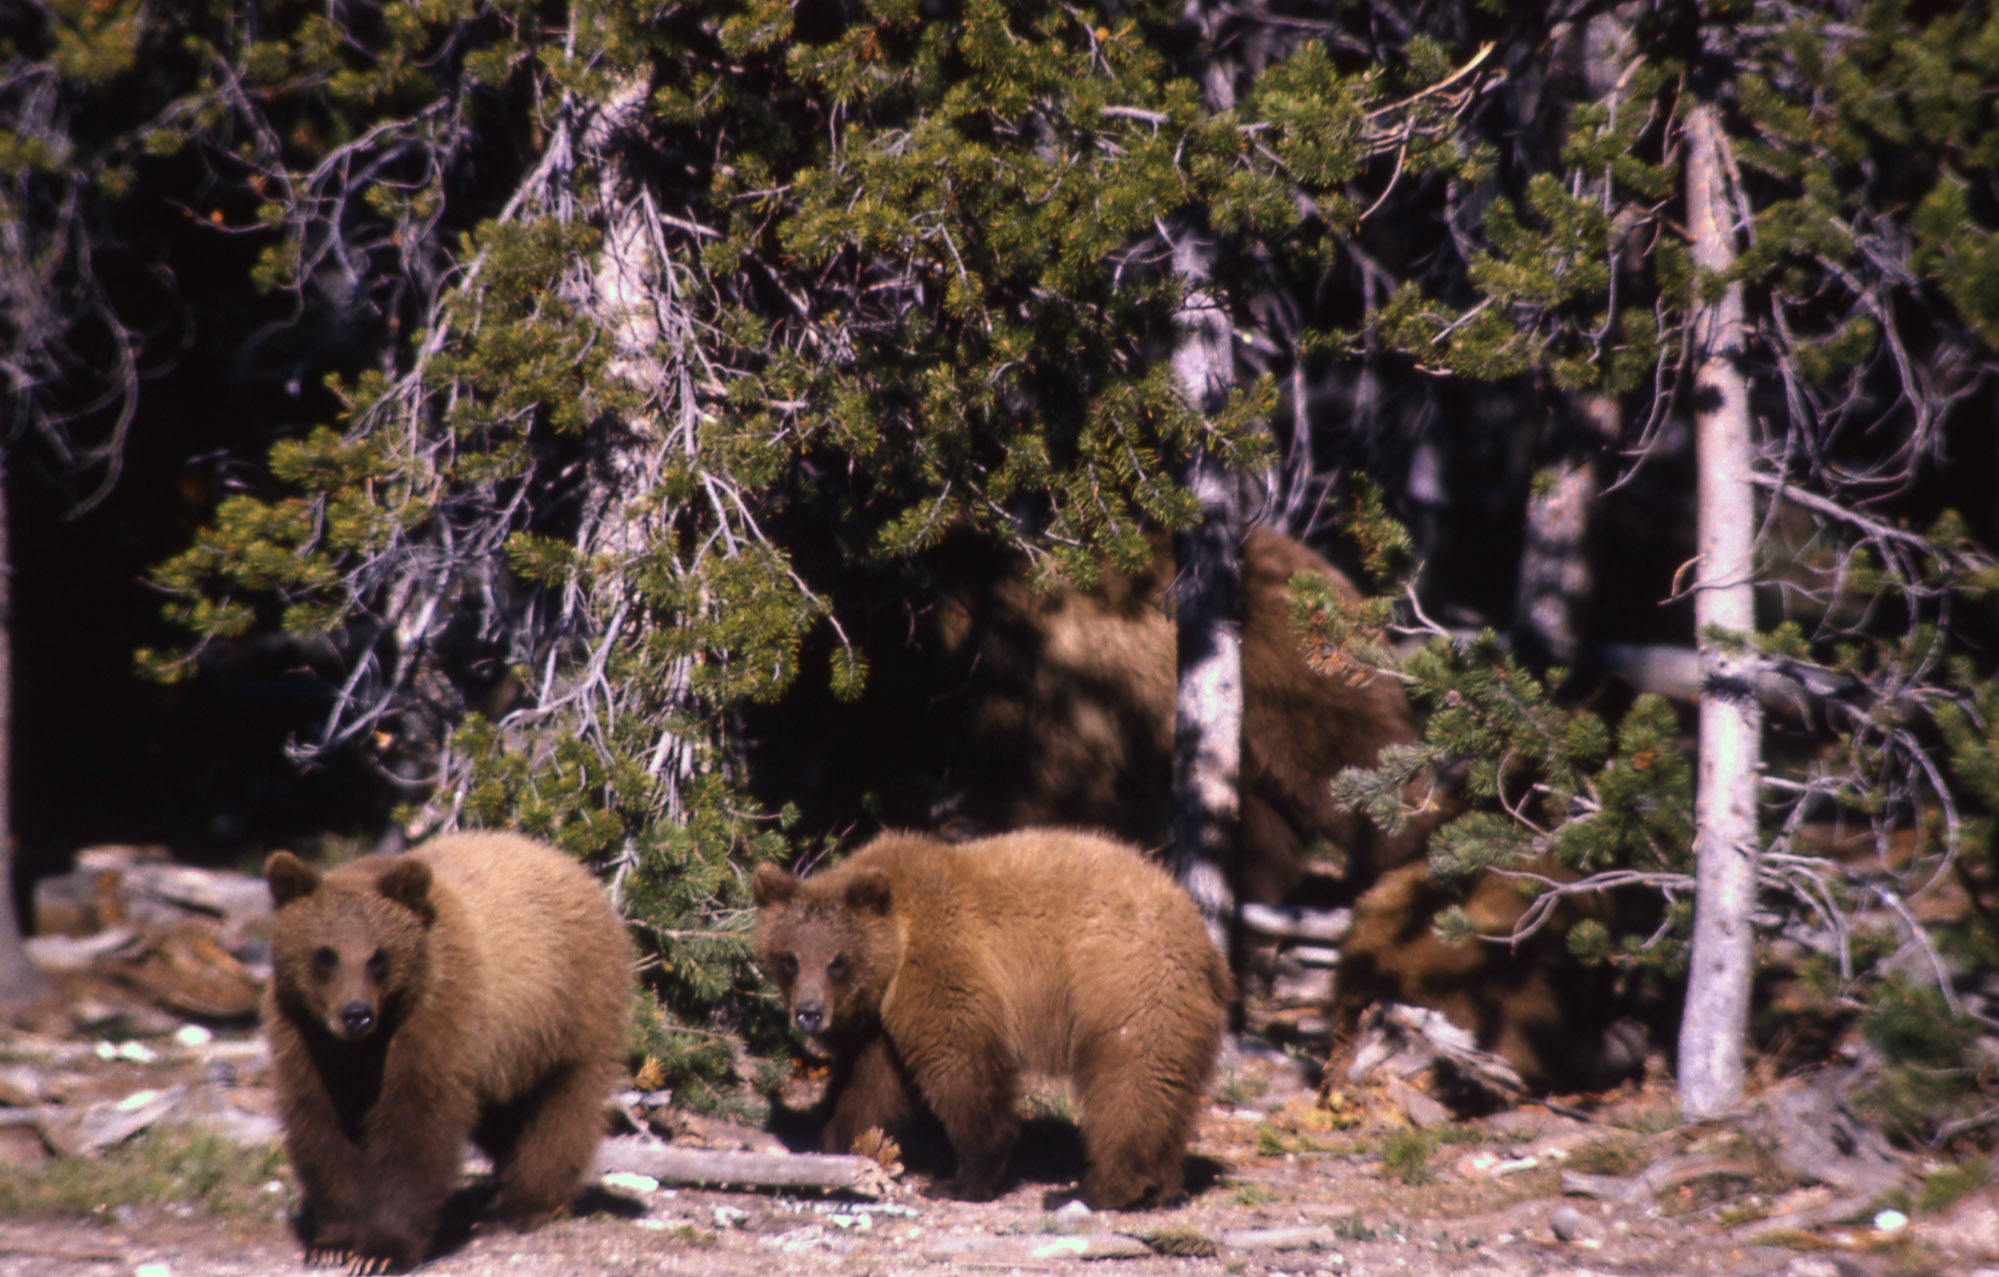 Tribes seek consultation on status of Yellowstone grizzly bear